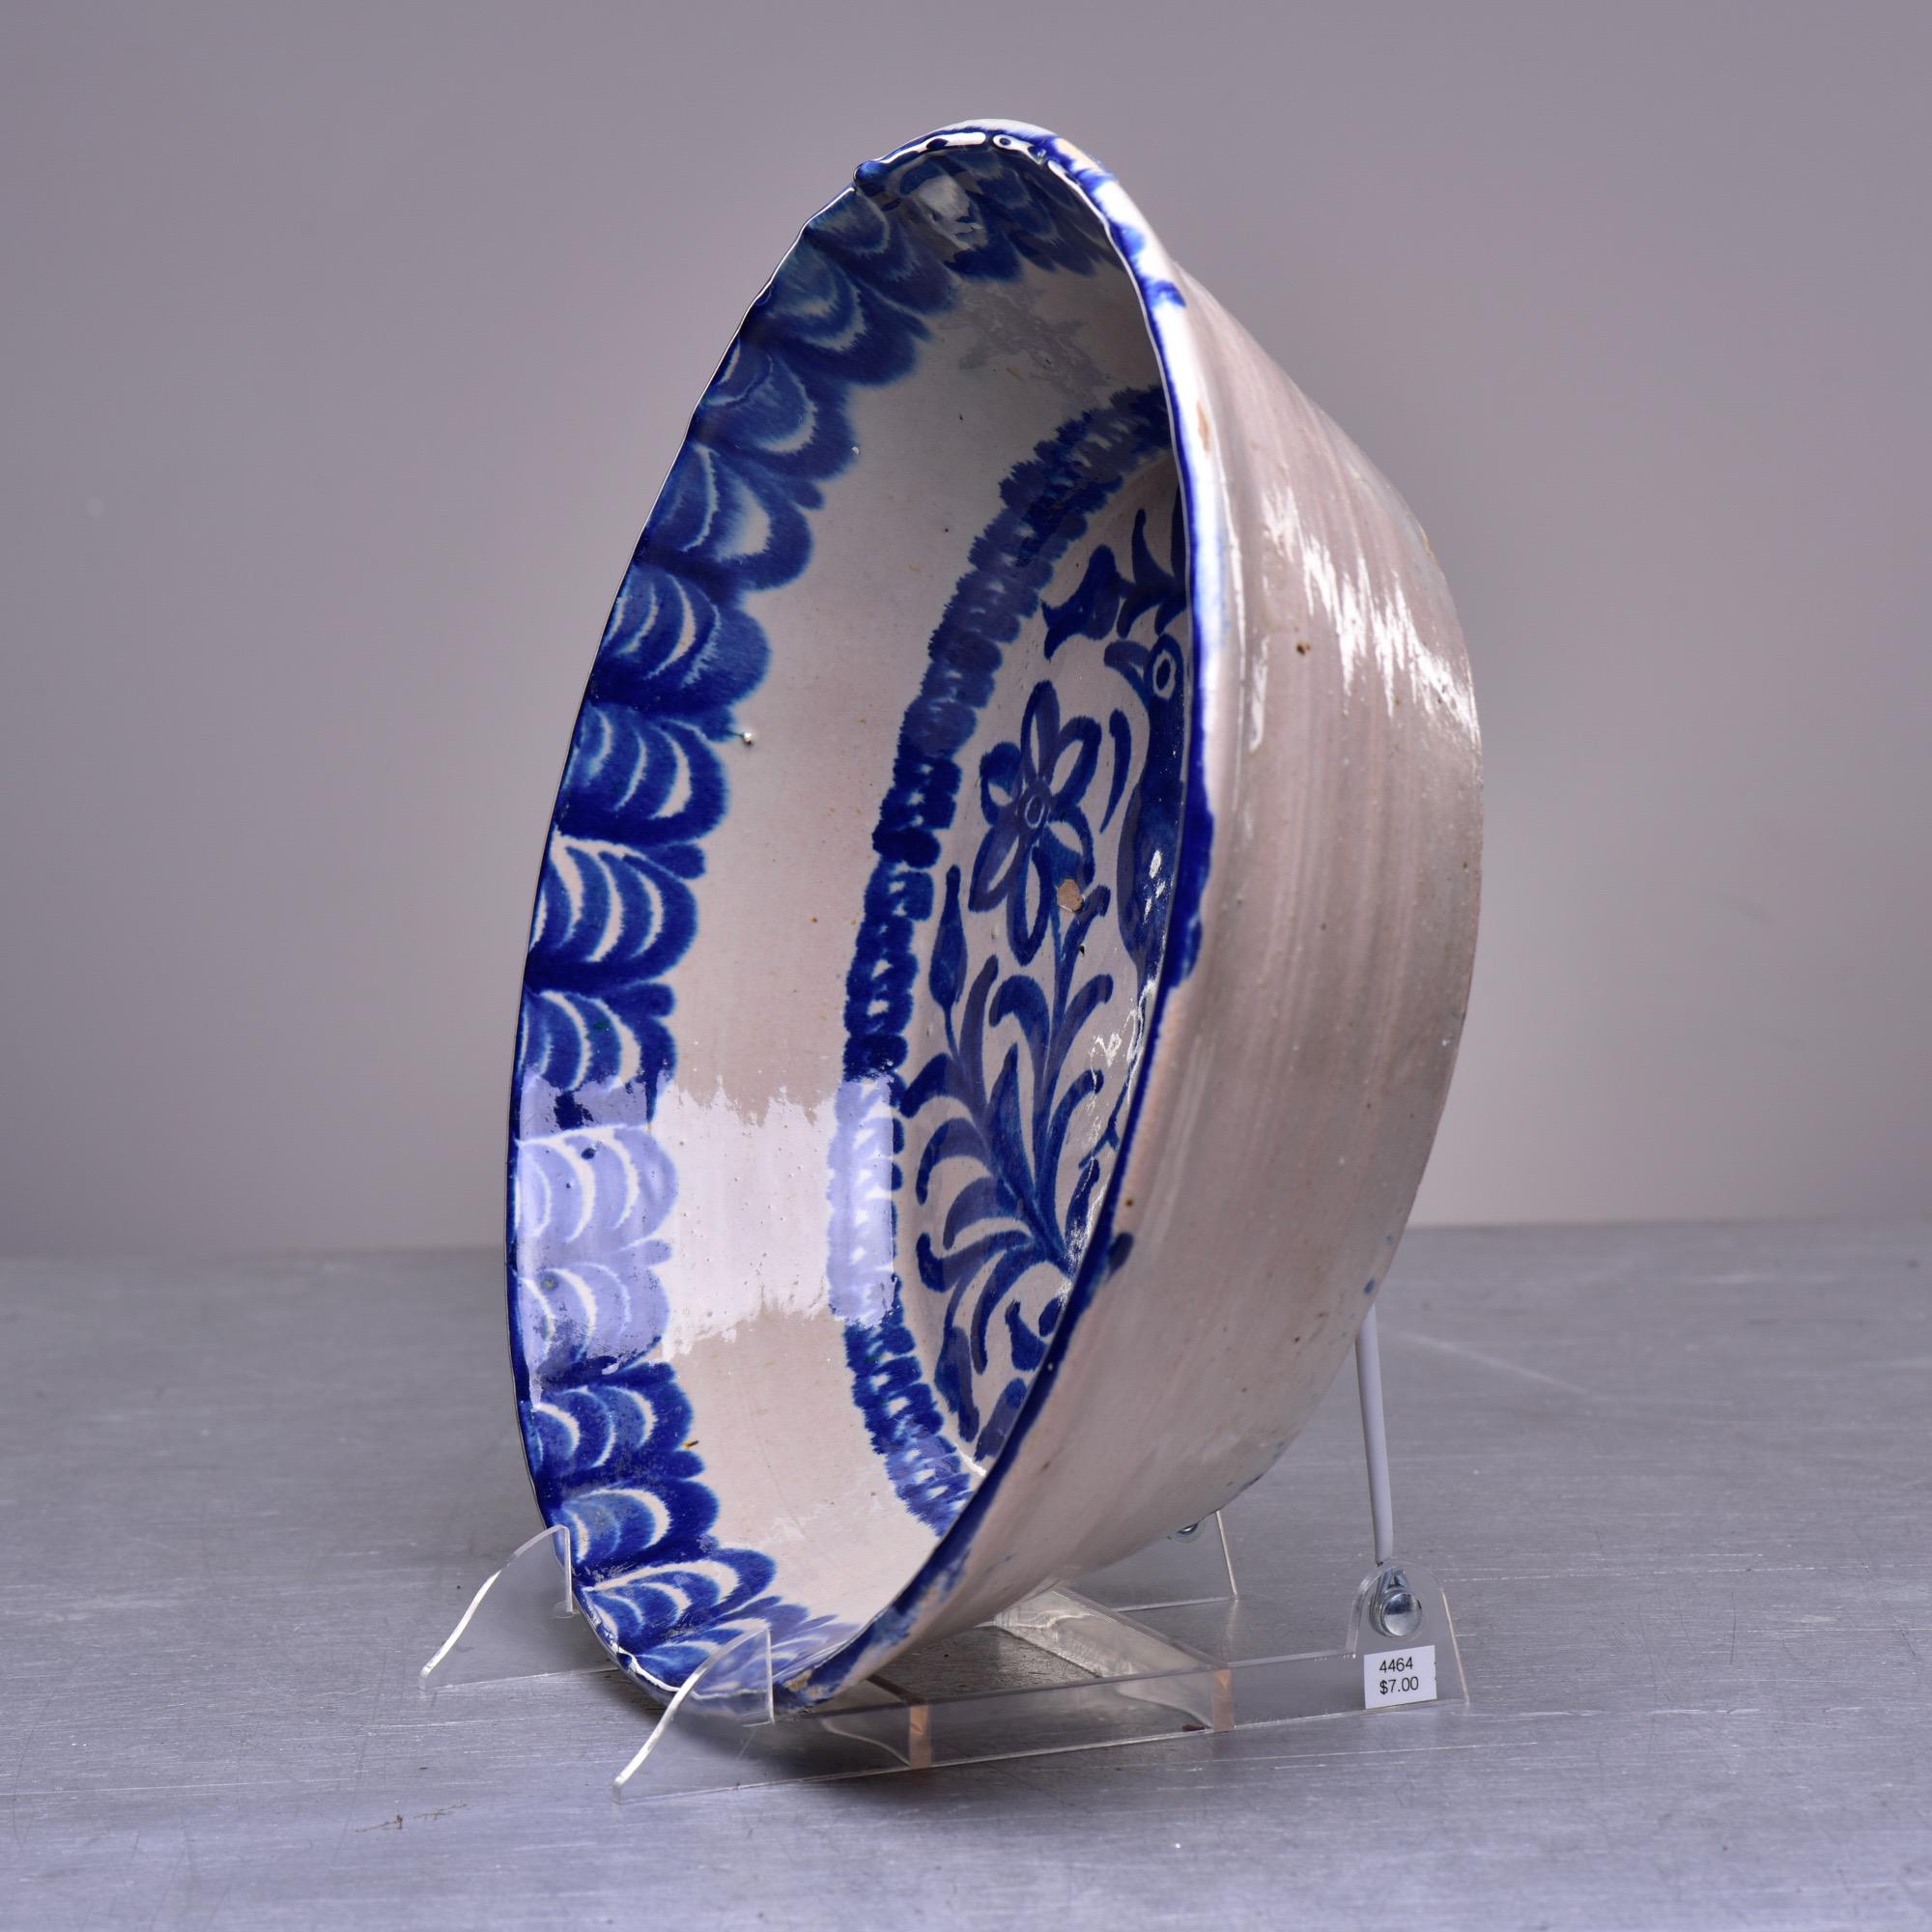 Fajalauza is a style that originates in Granada's Albaicín suburb, known for its mix of Christian and Al-Andalus cultures, as can be admired in the Alhambra Palace that overlooks Albaicín. This shallow bowl in the traditional blue and white glaze